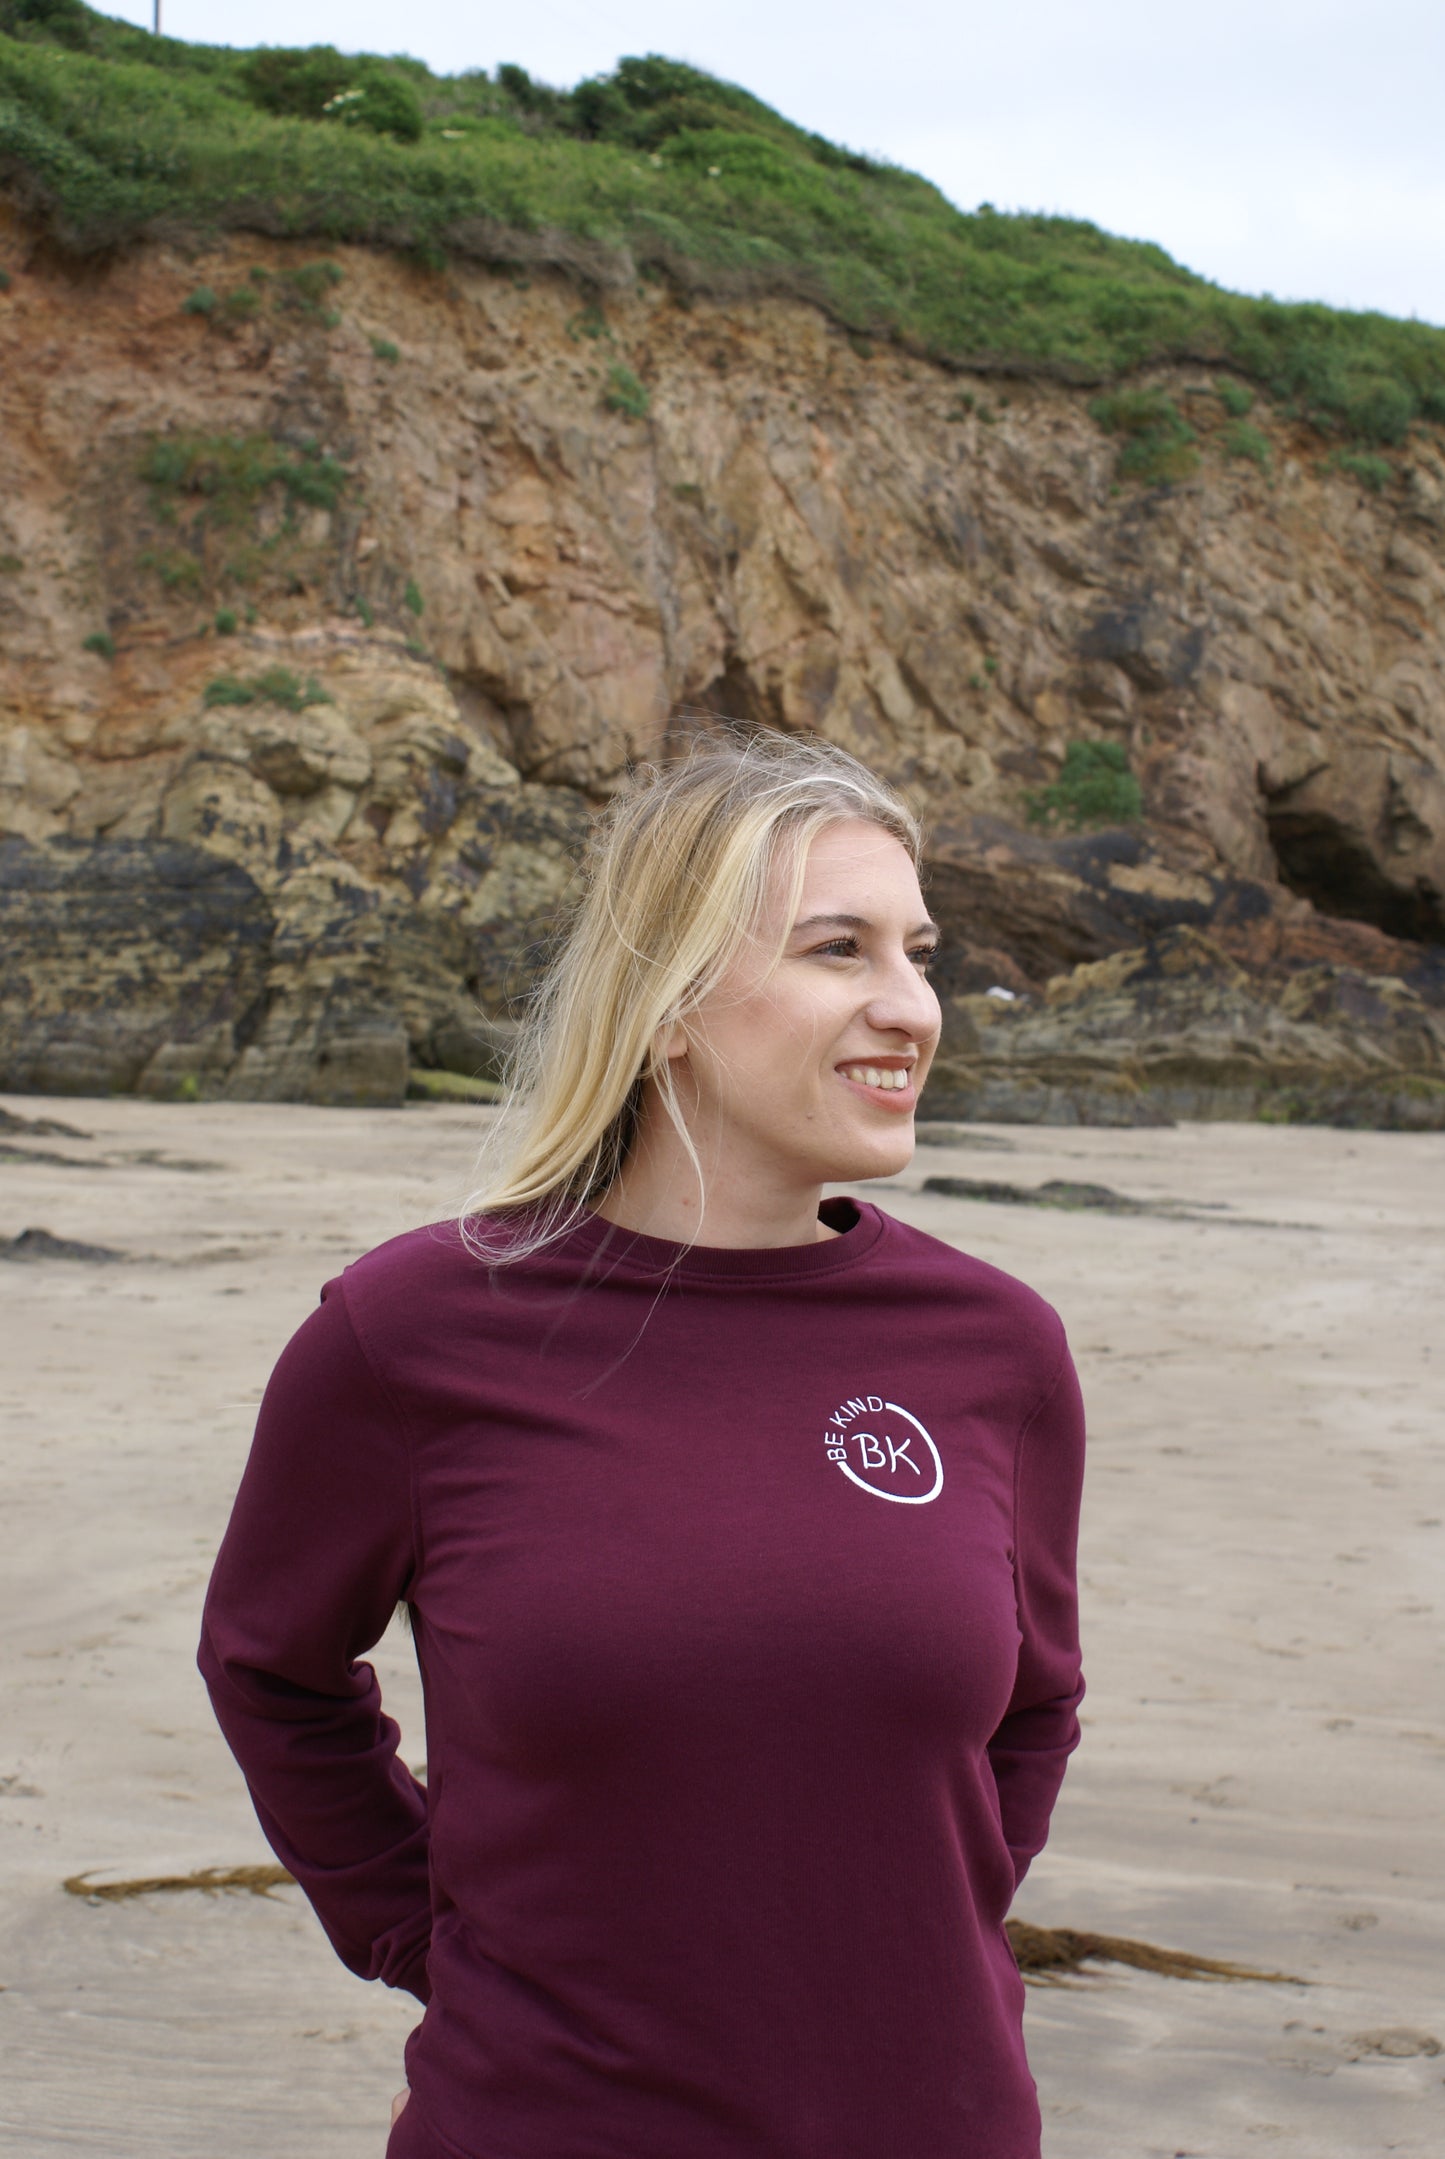 A woman stands on a beach, she's wearing an Organic Cotton Burgundy sweatshirt from Be Kind Apparel's Freestyle Range